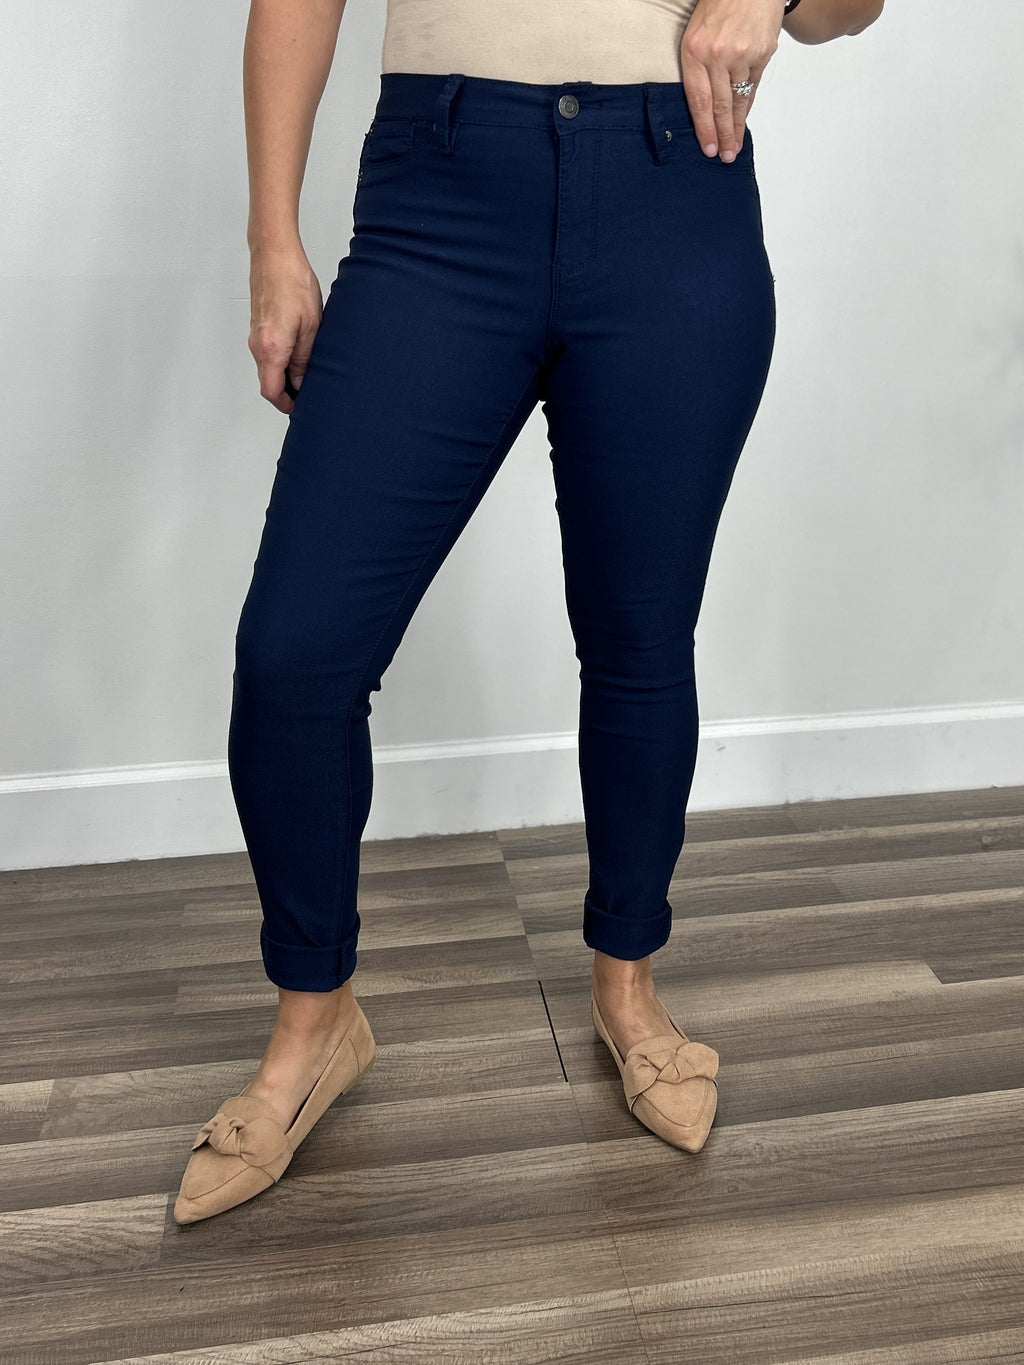 Women's navy blue skinny pants with a single button zipper fly and faux front pockets.